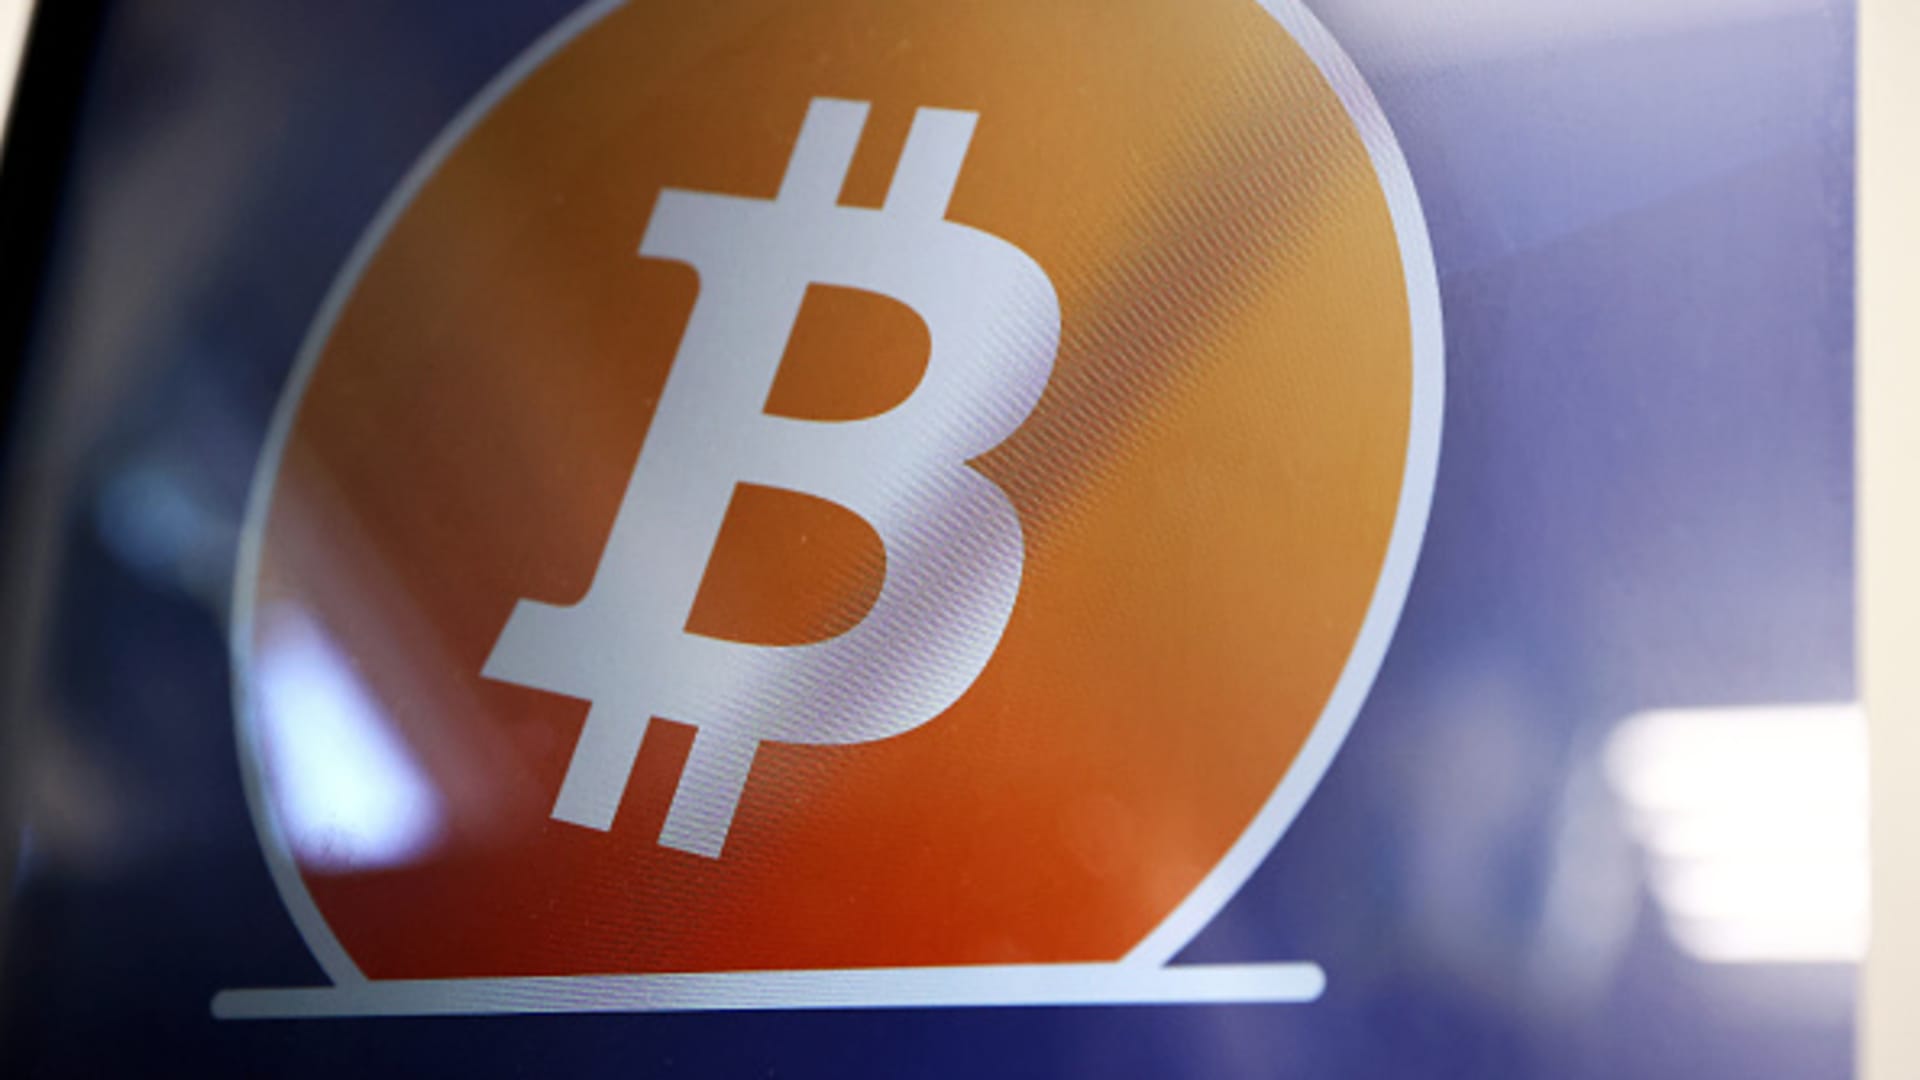 Bitcoin rises slightly after SEC sues Coinbase alleging it acted as an unregistered broker